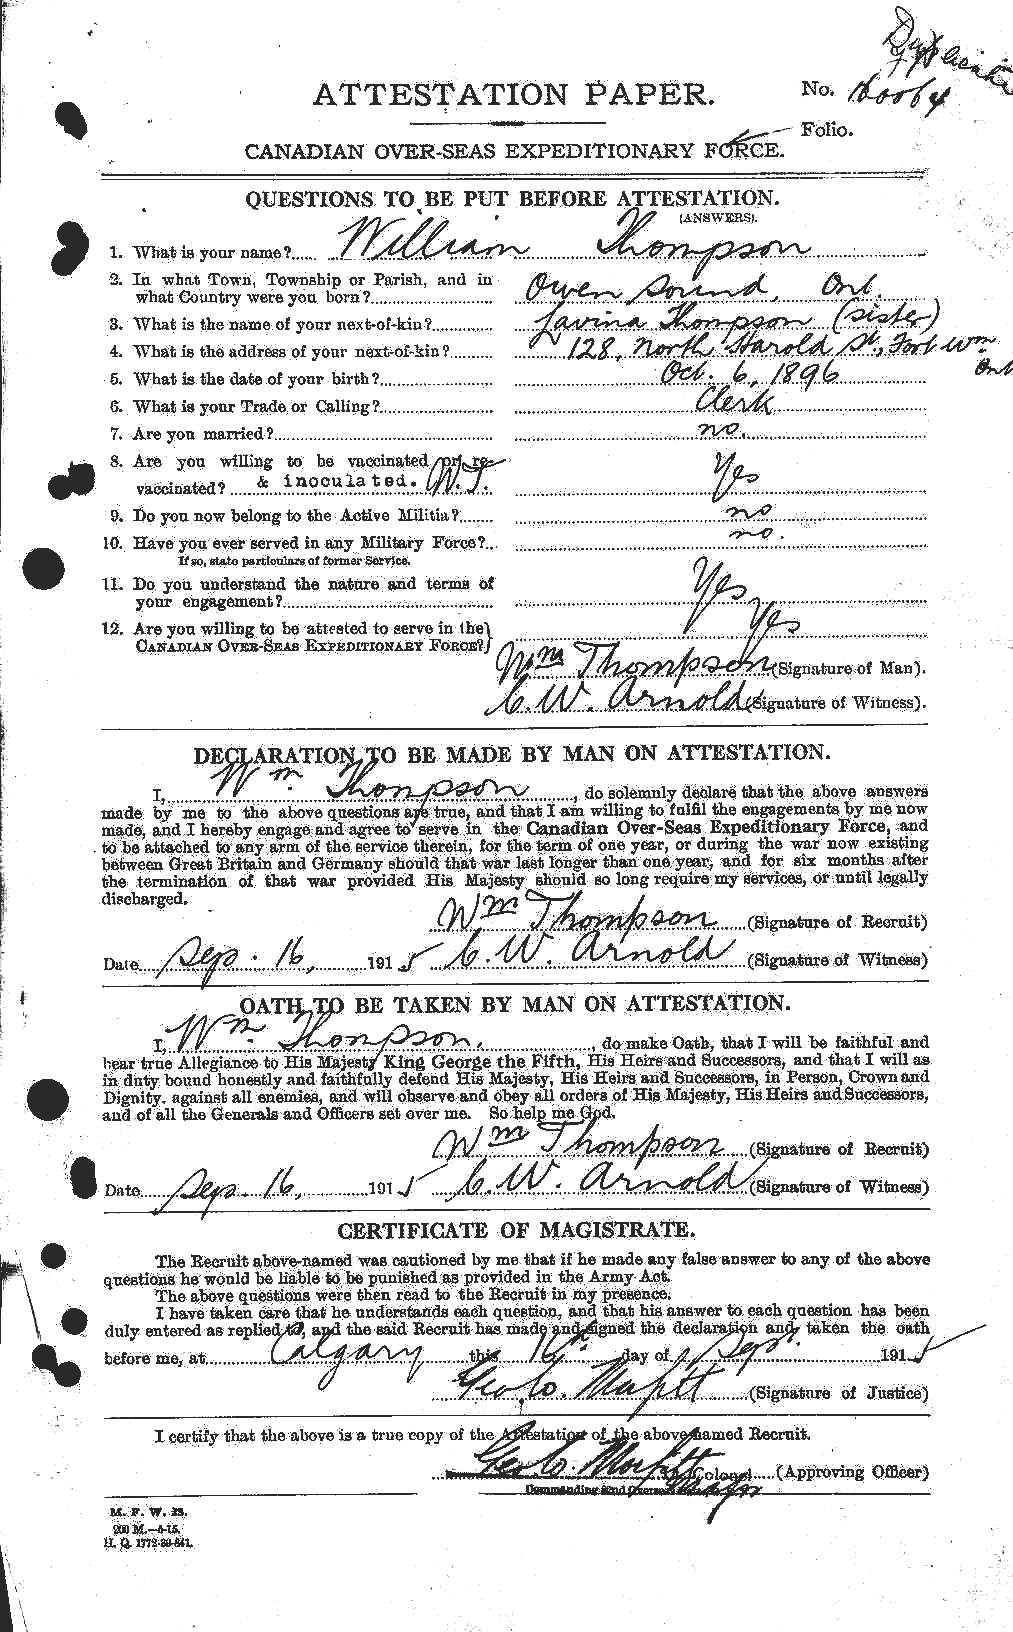 Personnel Records of the First World War - CEF 636044a